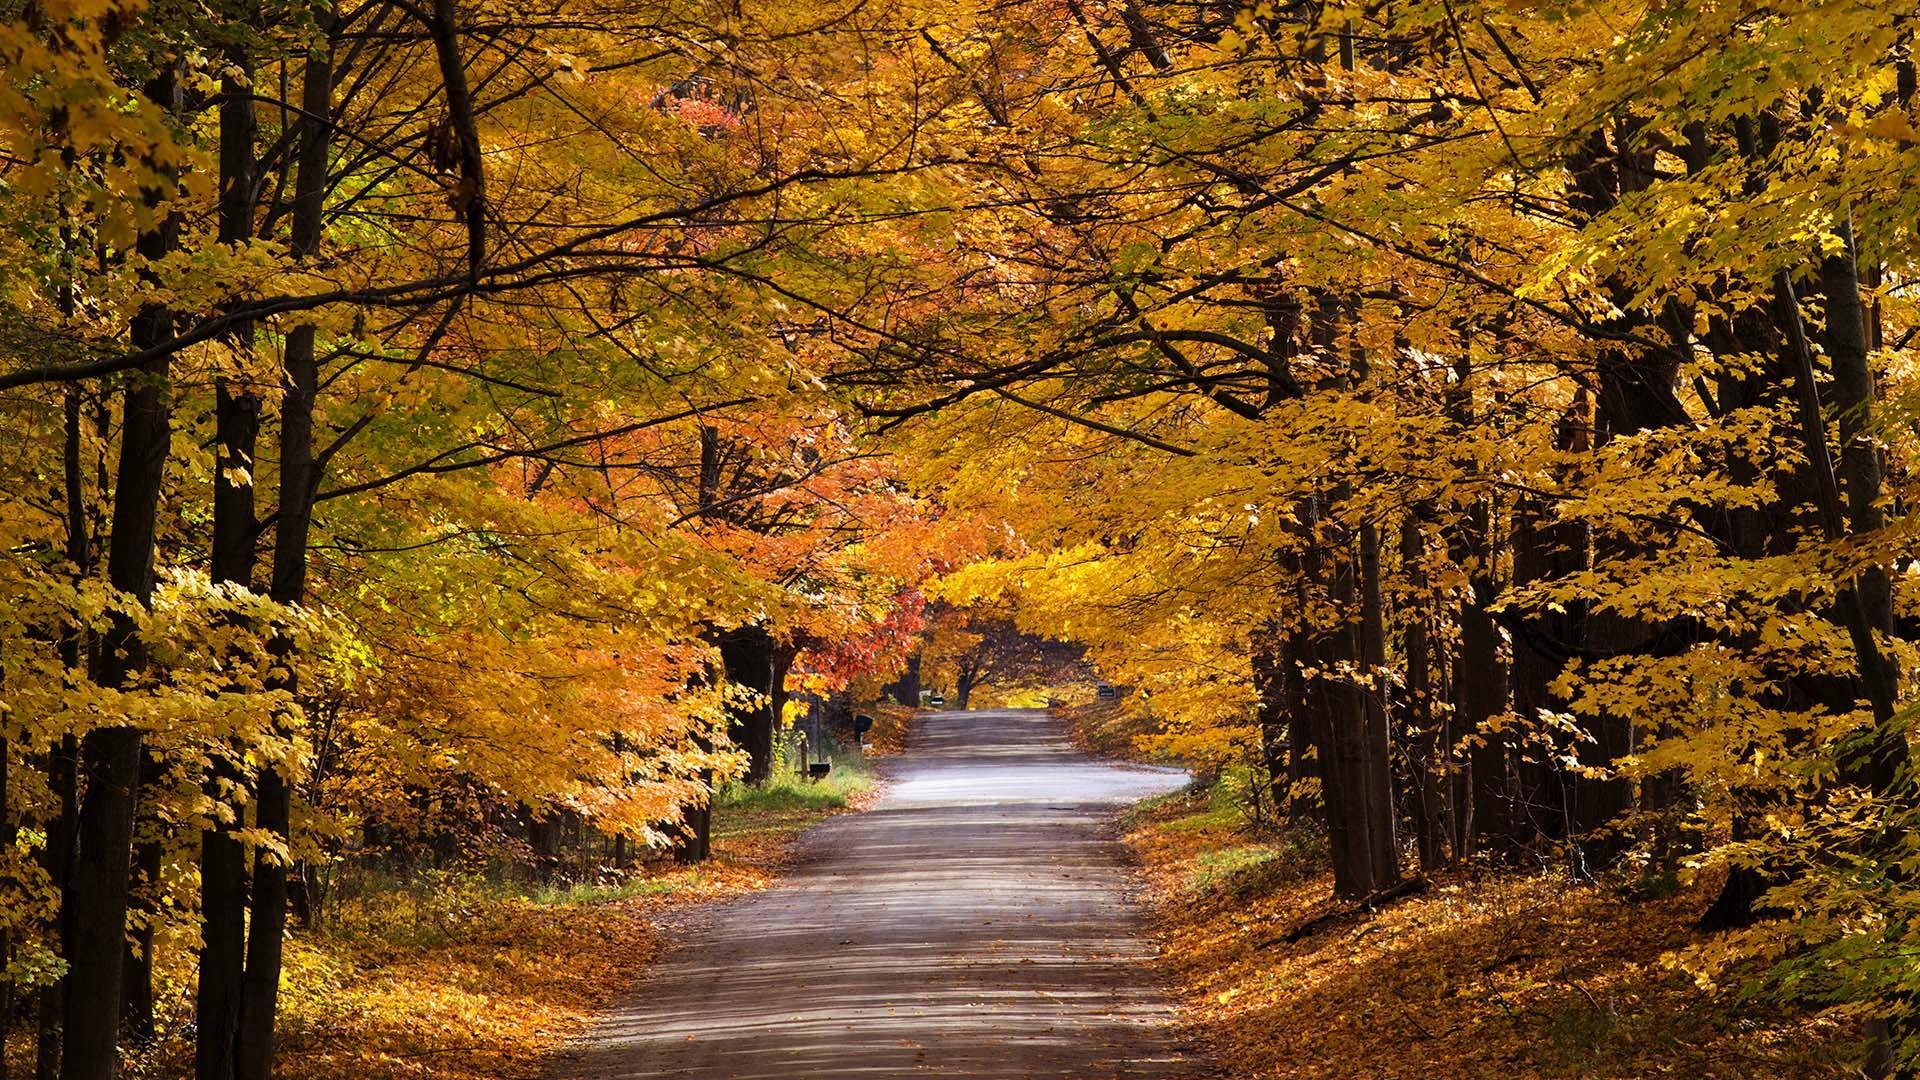 A country road in the Fall.